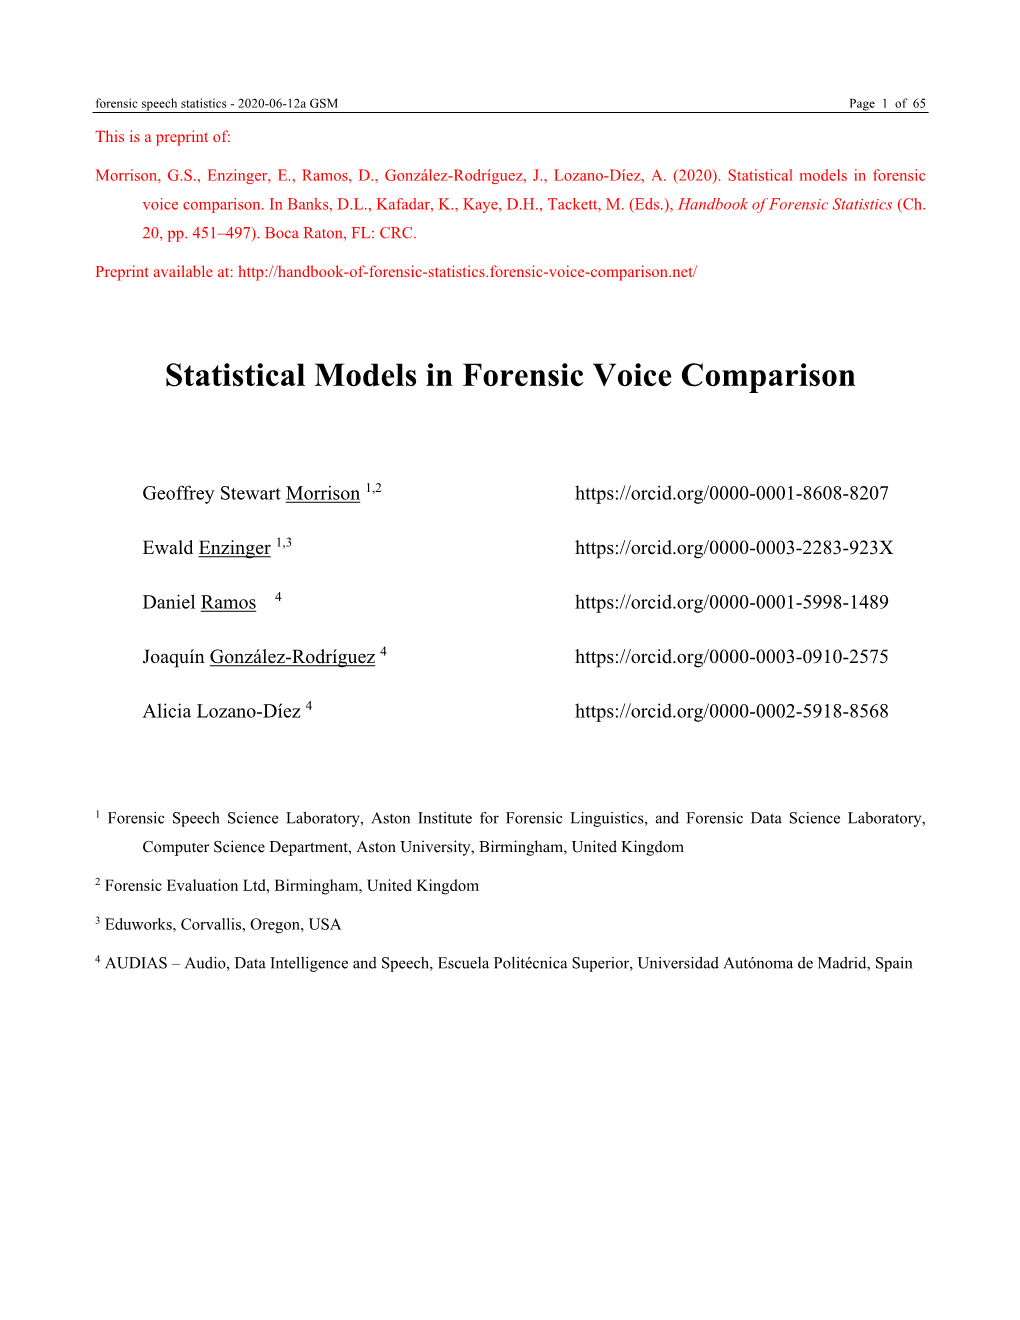 Statistical Models in Forensic Voice Comparison